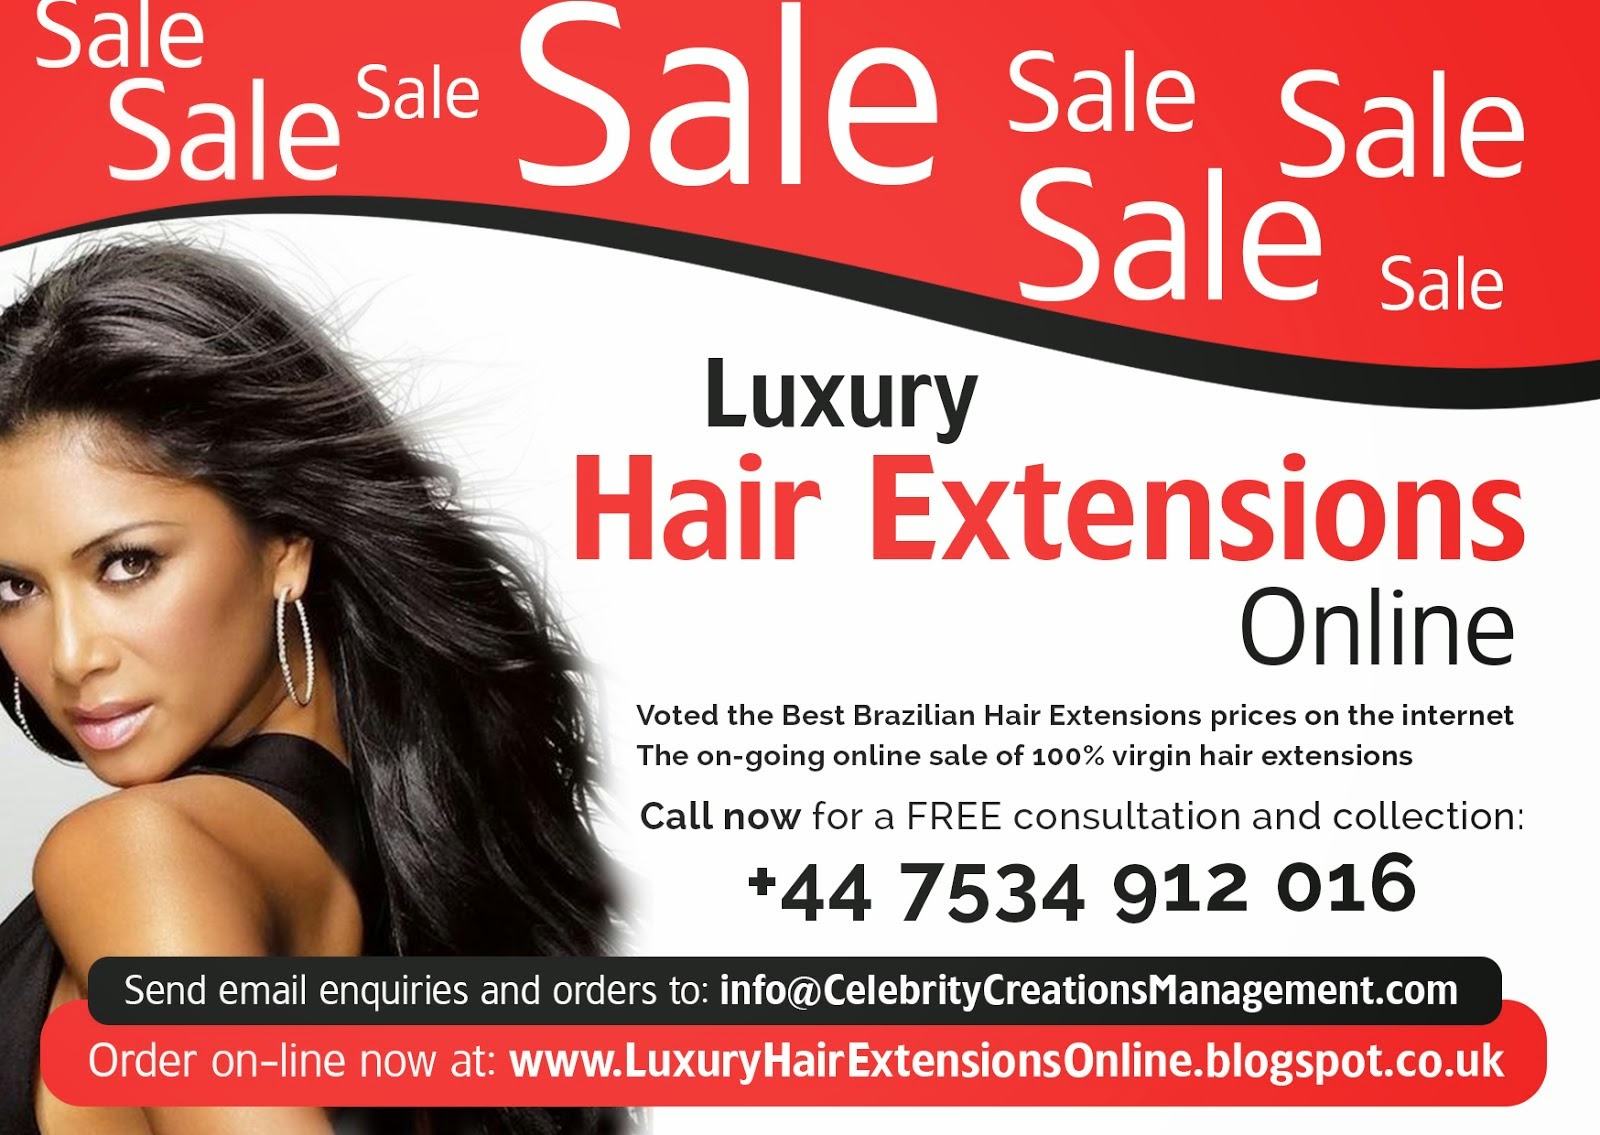 THE LUXURY HAIR EXTENSIONS SALE